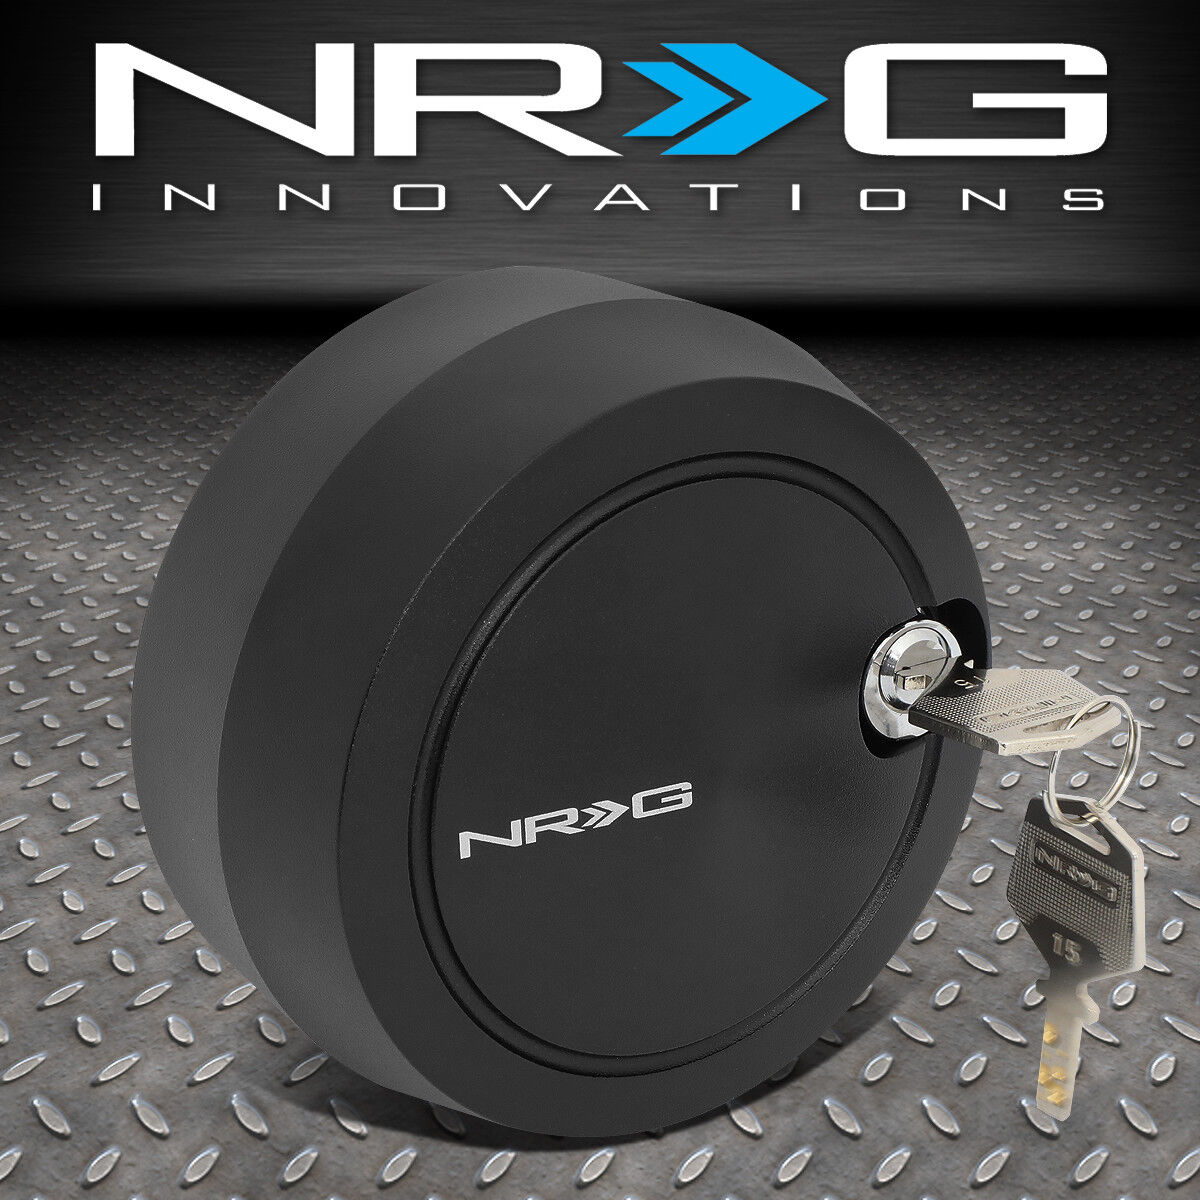 NRG INNOVATIONS VERSION 2 FREE SPIN COVER QUICK RELEASE HUB LOCK W/KEY SRK-201MB